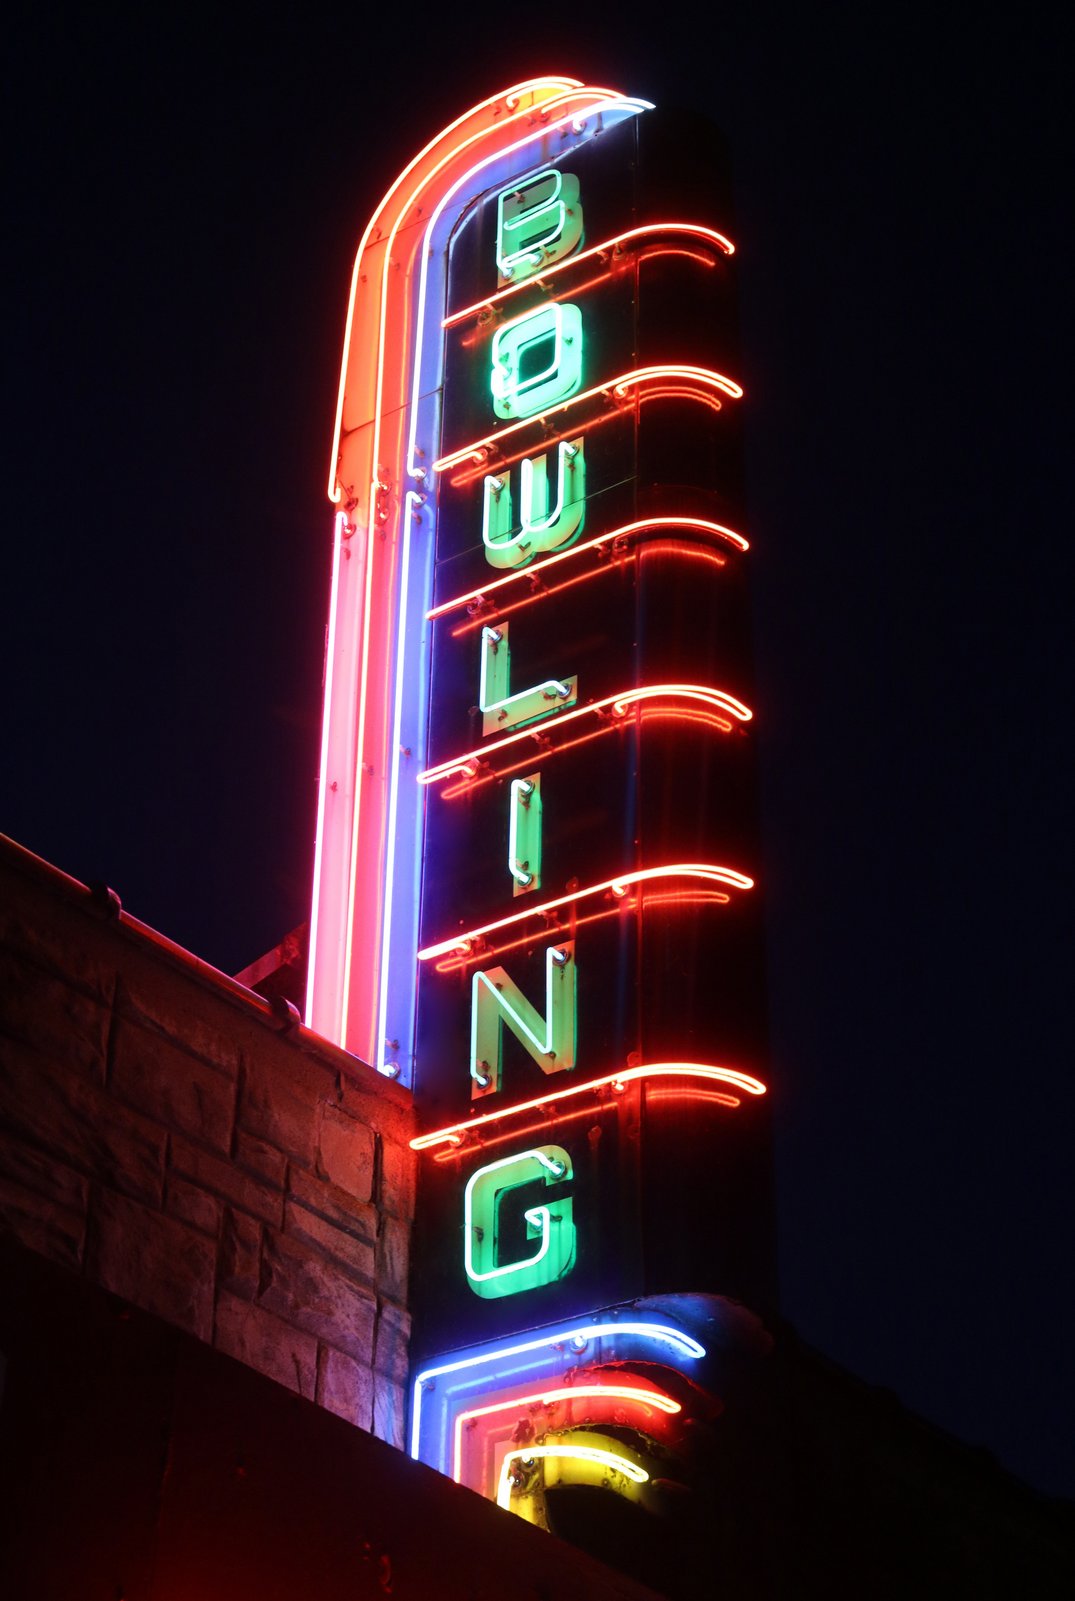 The neon sign at Bowlmor. Photo by Bruce Walters.